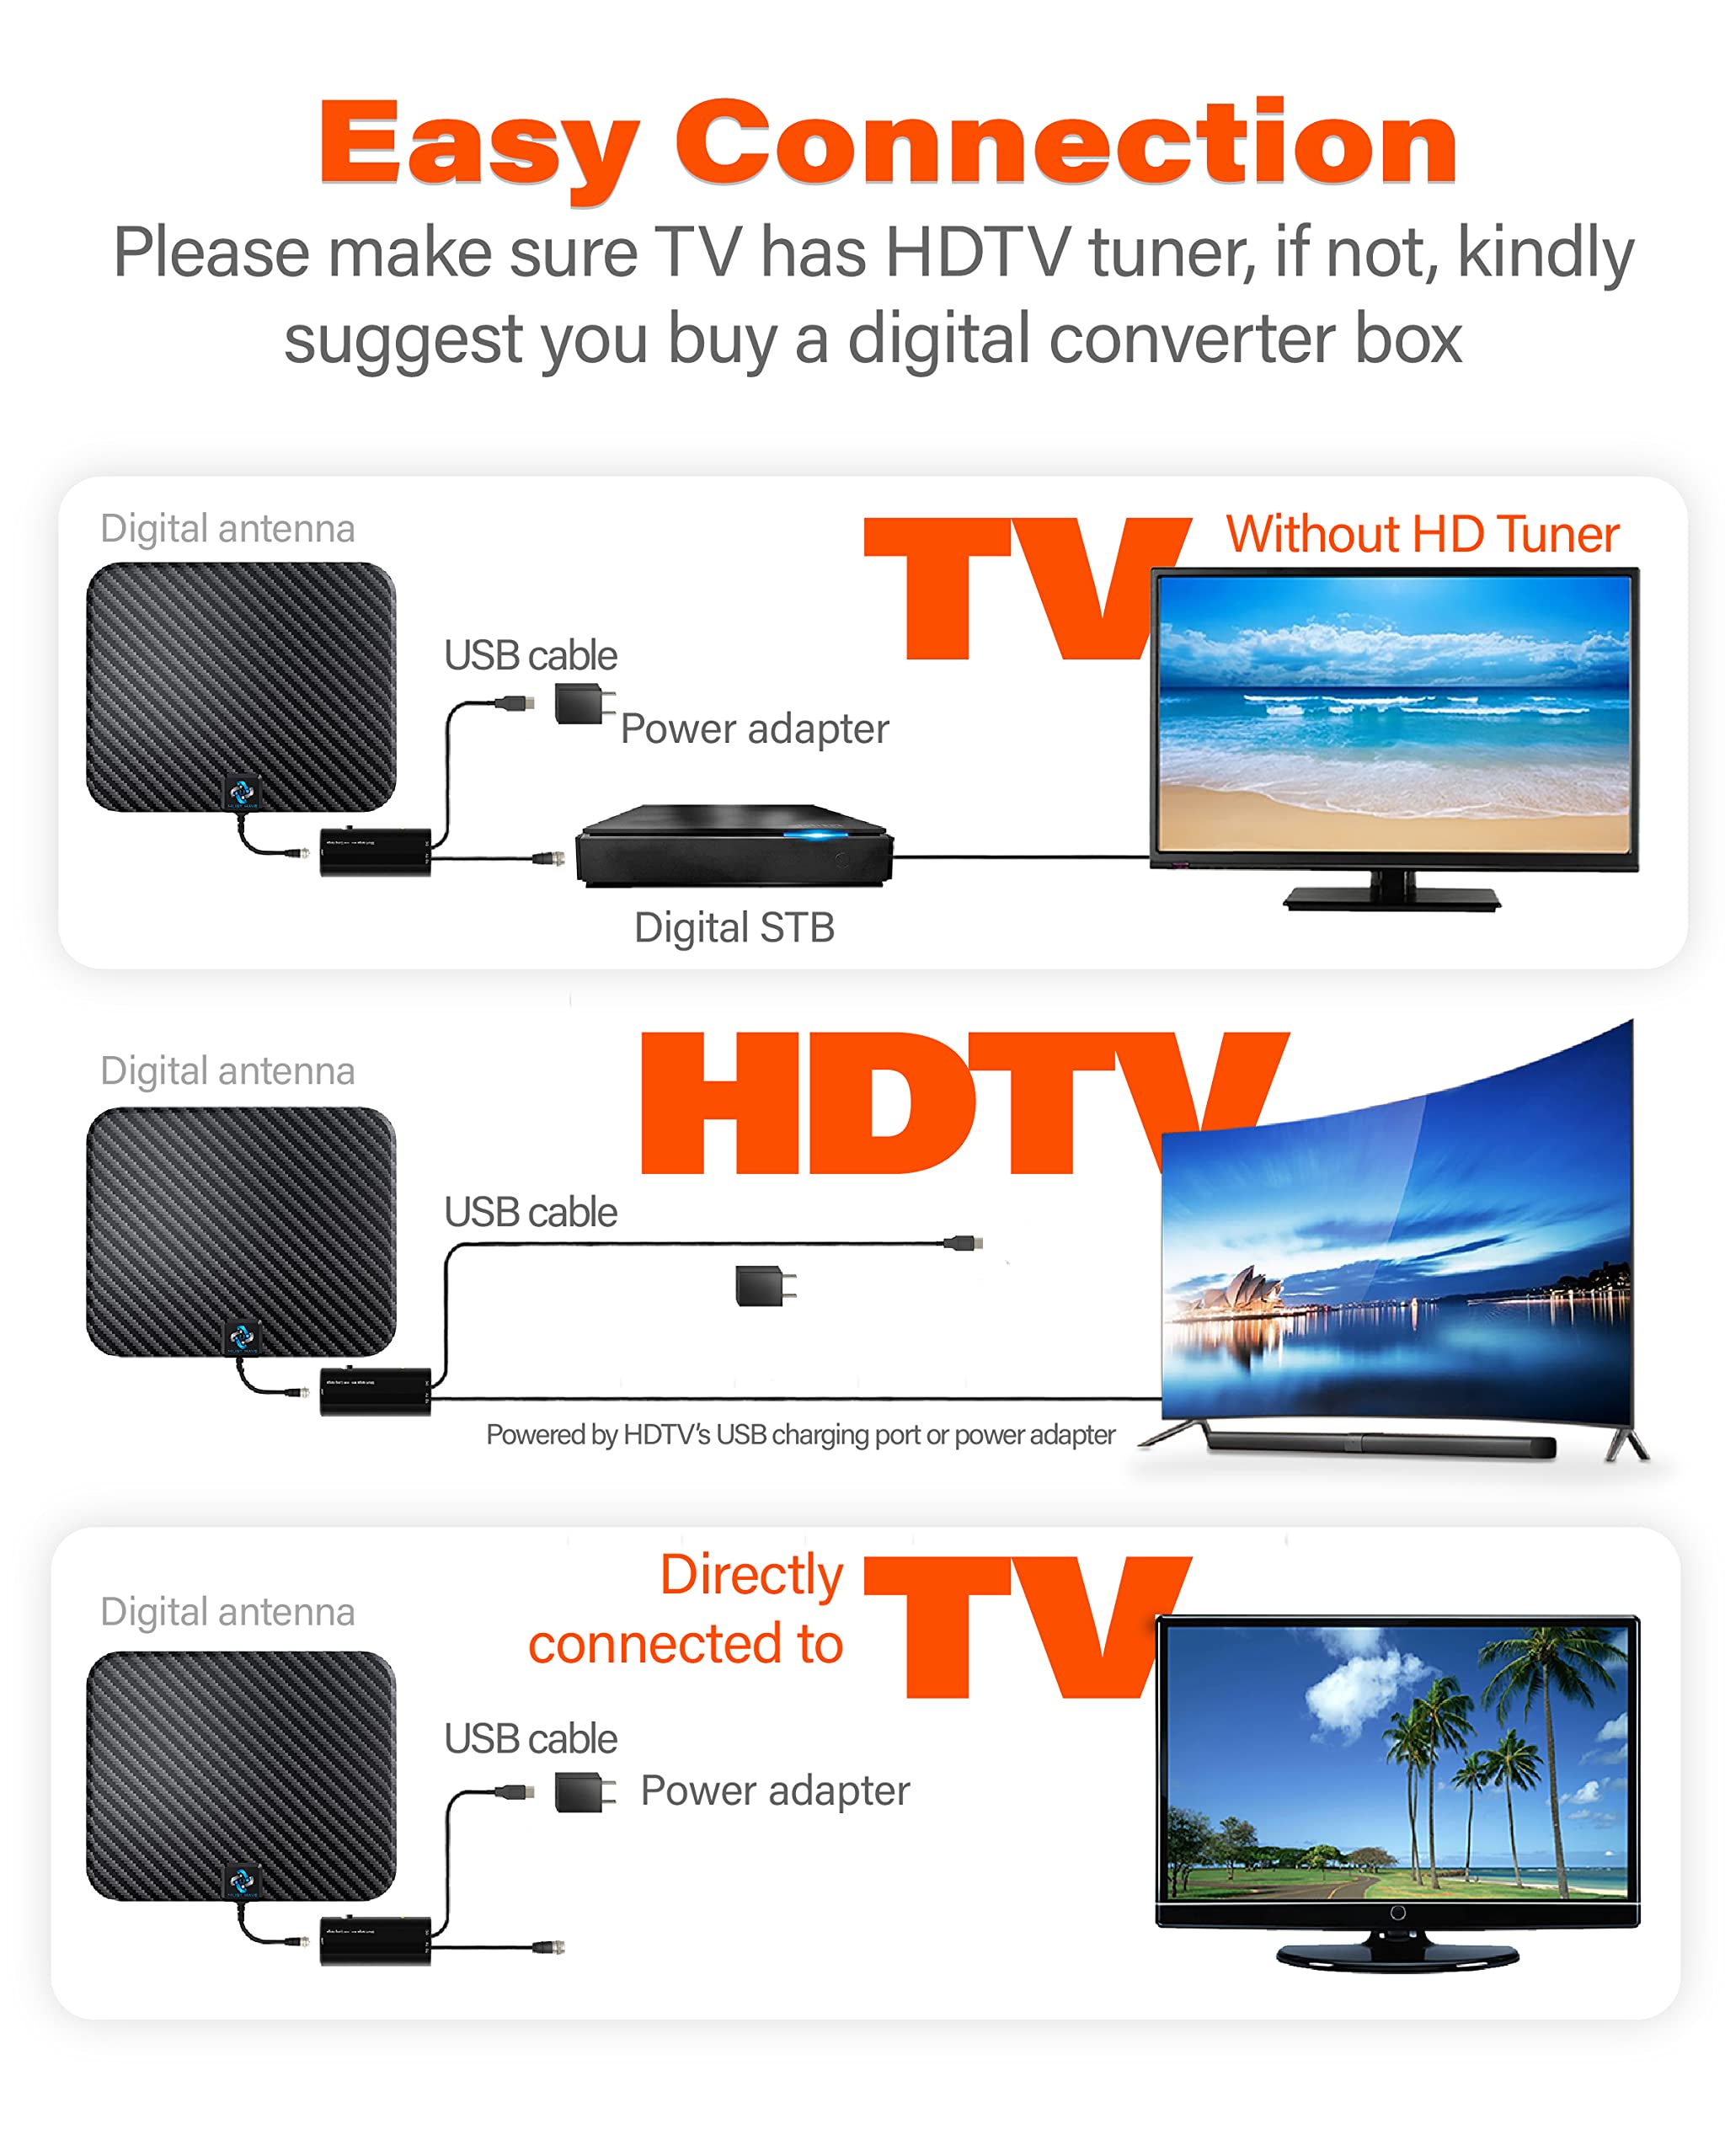 U MUST HAVE Amplified HD Digital TV Antenna Long 250+ Miles Range - Support 4K 1080p Fire tv Stick and All TV's - Indoor Smart Switch Amplifier Signal Booster - 18ft HDTV Cable/AC Adapter, Carbon v.